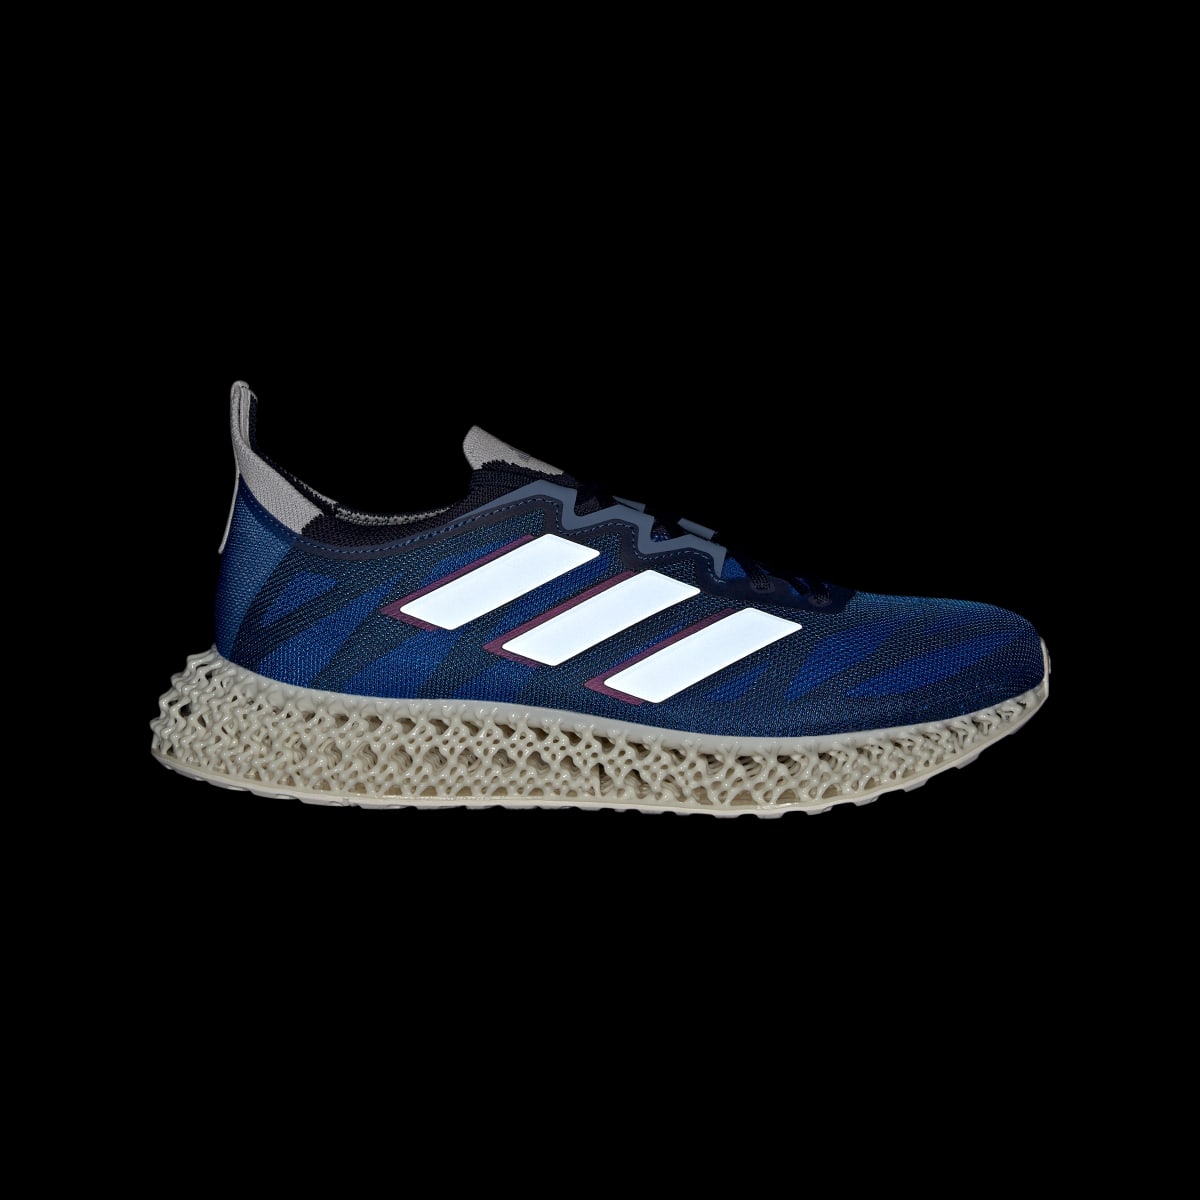 Adidas 4DFWD 3 Running Shoes. 5